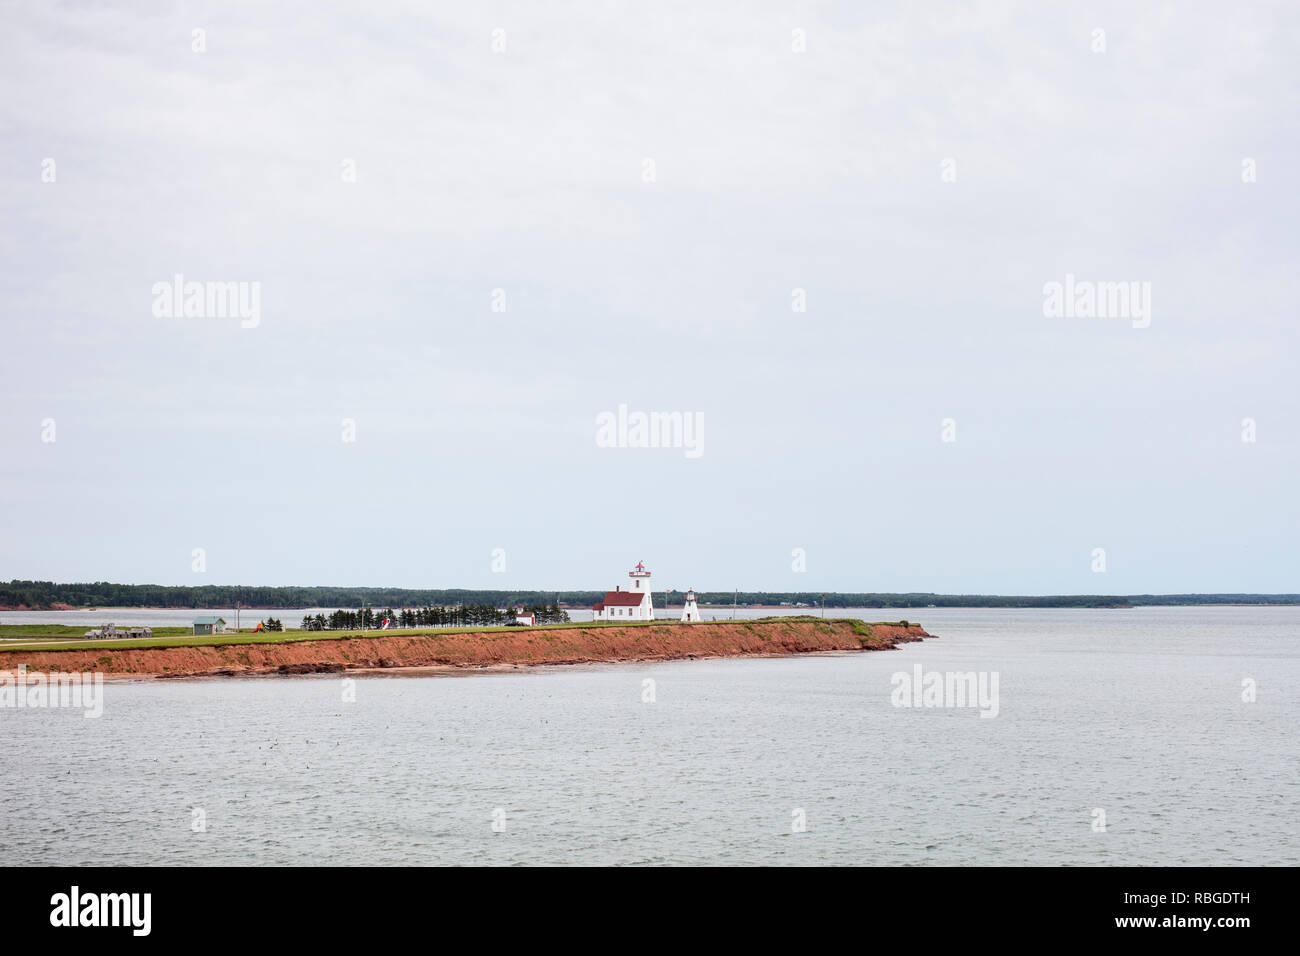 WOODS ISLAND PROVINCIAL PARK, PRINCE EDWARD ISLAND, CANADA - July 12, 2018: The lighthouse at Woods Island Provincial Park.  ( Ryan Carter ) Stock Photo